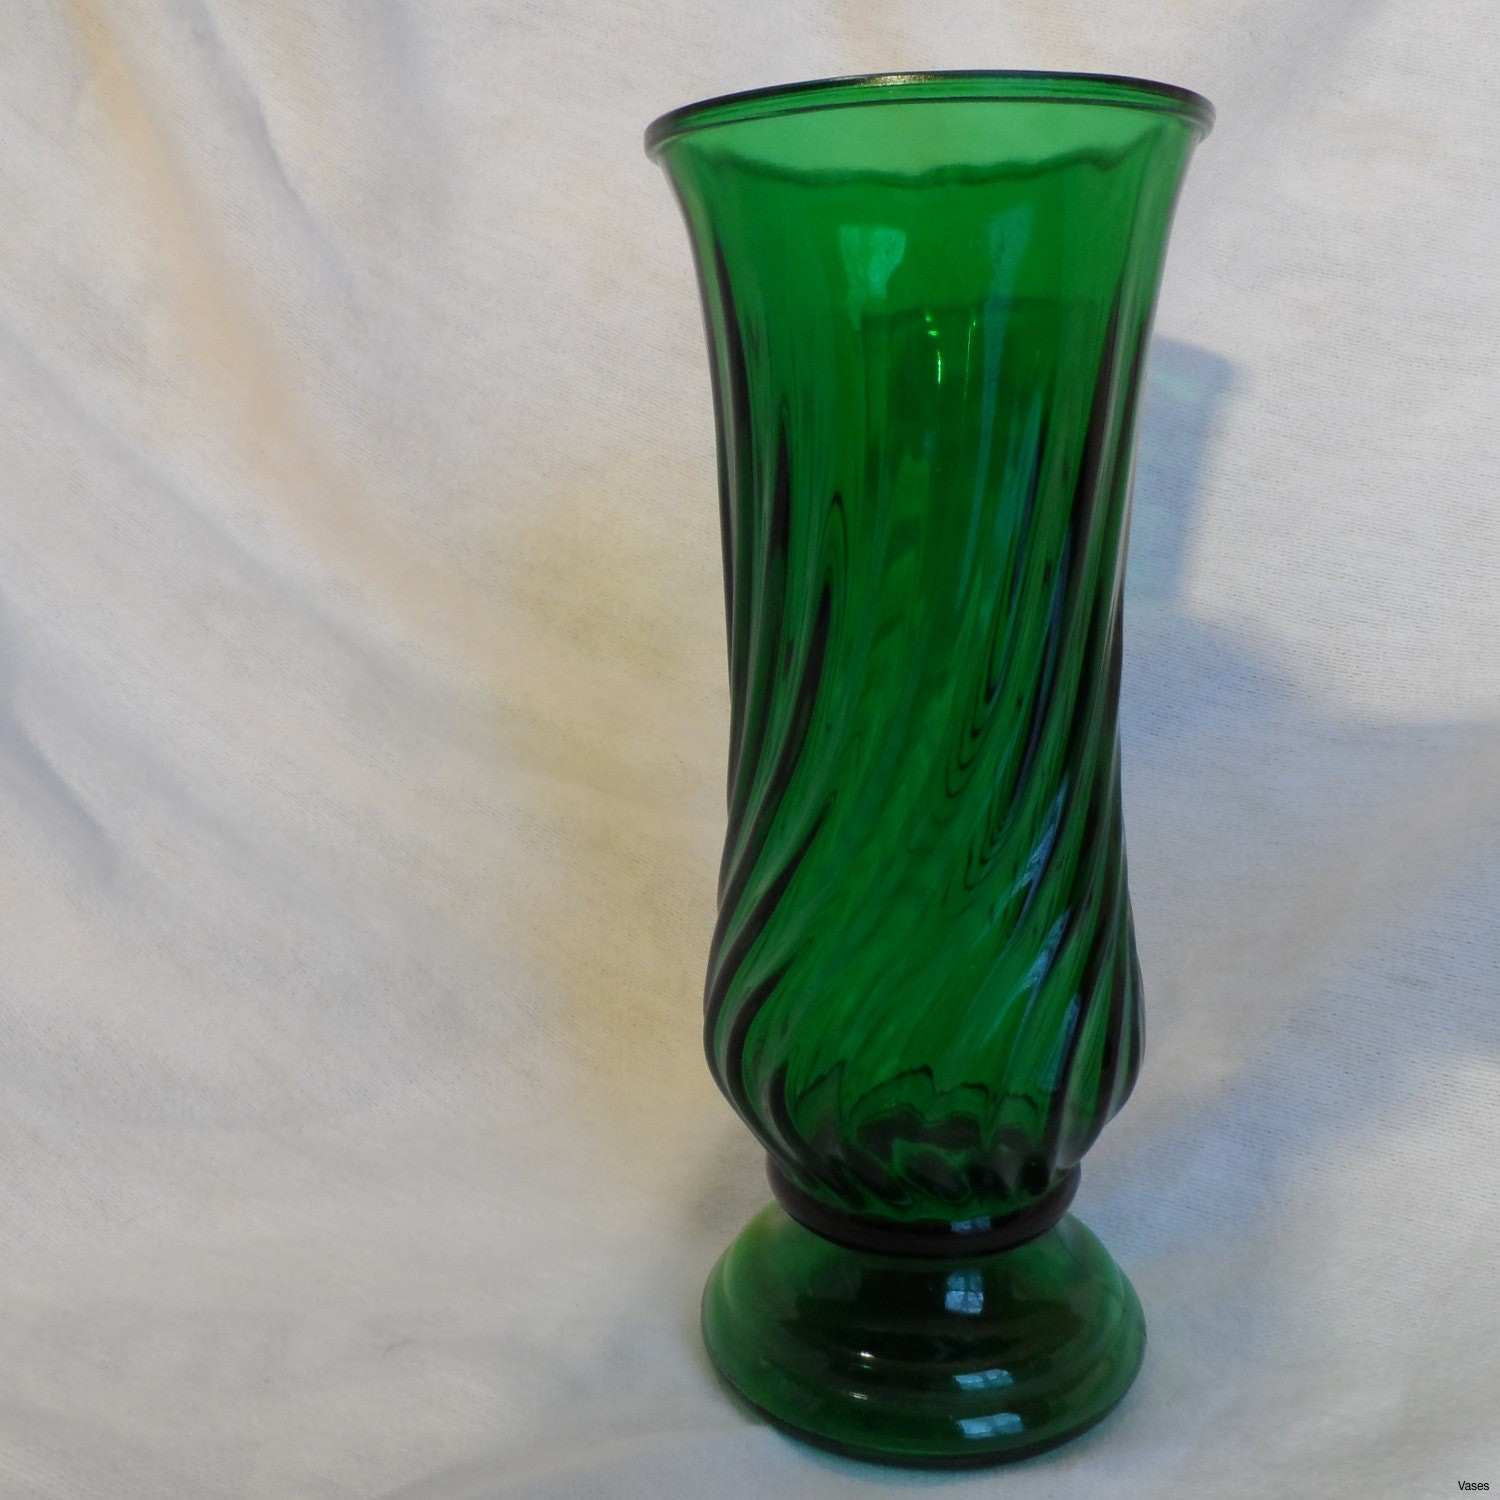 28 Recommended Antique Glass Vases Value 2024 free download antique glass vases value of green design homes fresh three pieces different shapes beautiful pertaining to green design homes fresh three pieces different shapes beautiful vintage green gla